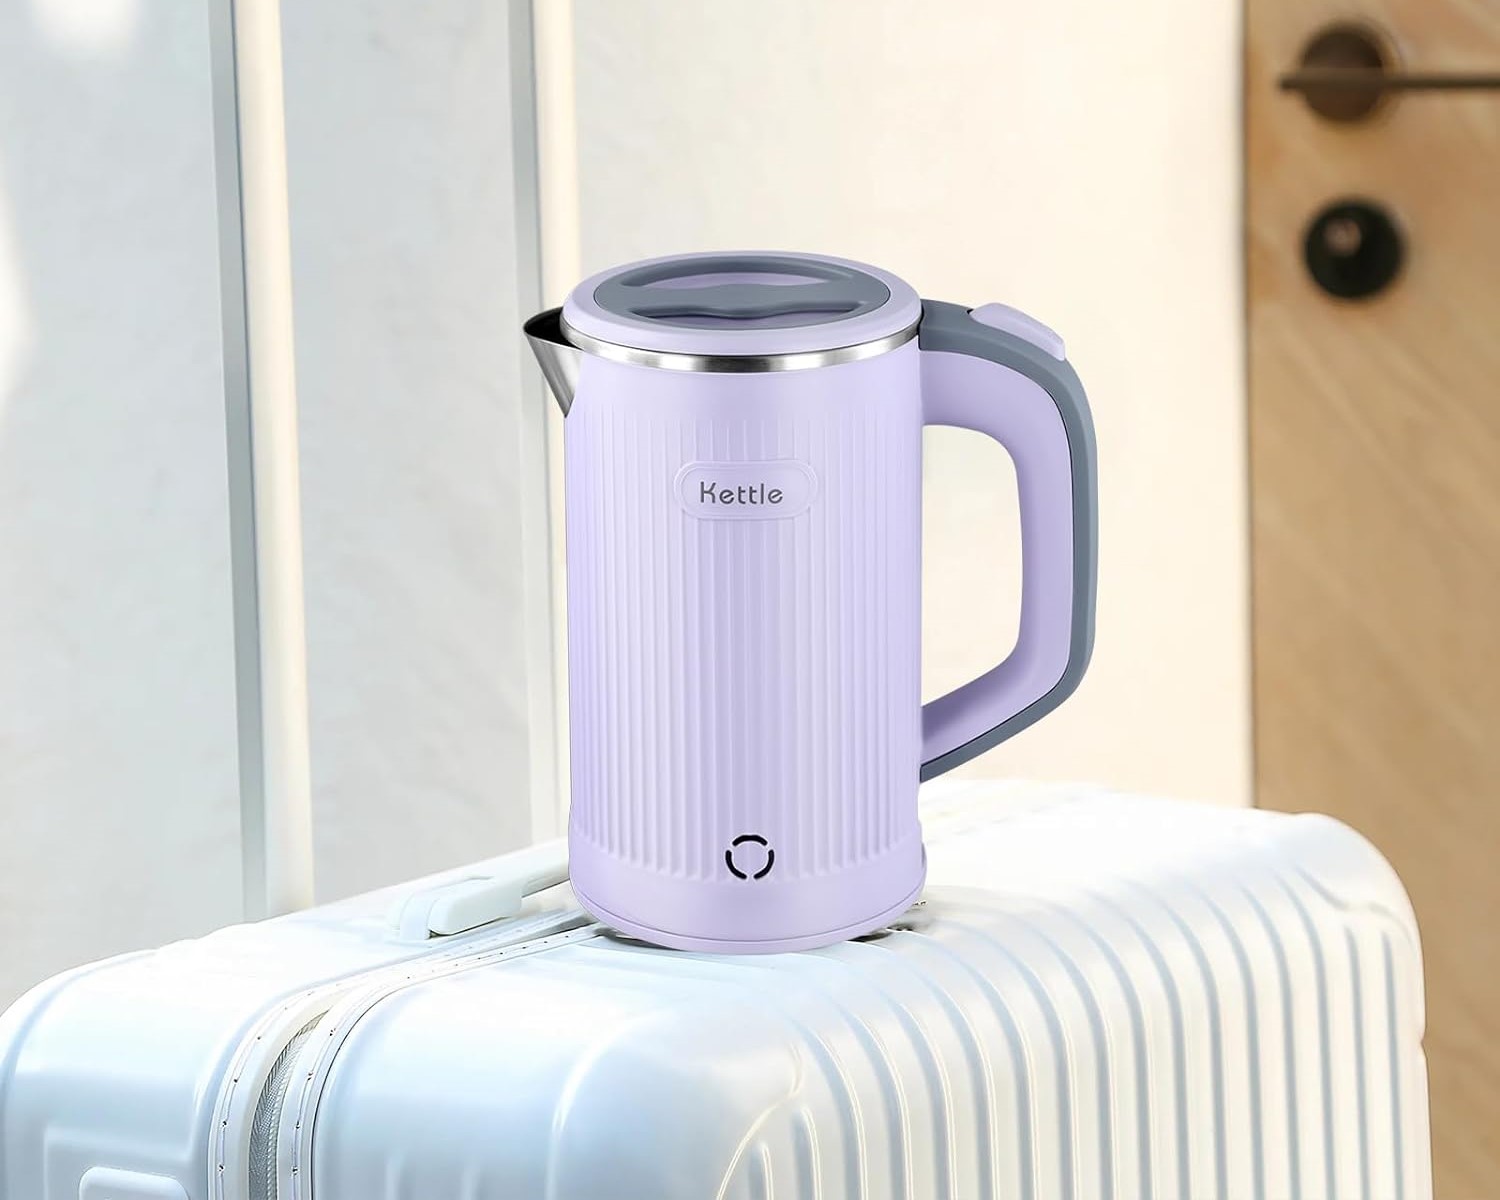 0.5L Portable Electric Kettle, Mini Travel Kettle, Stainless Steel Water  Kettle - Perfect For Traveling, Cooking Noodles, Boiling Water, Eggs,  Coffee